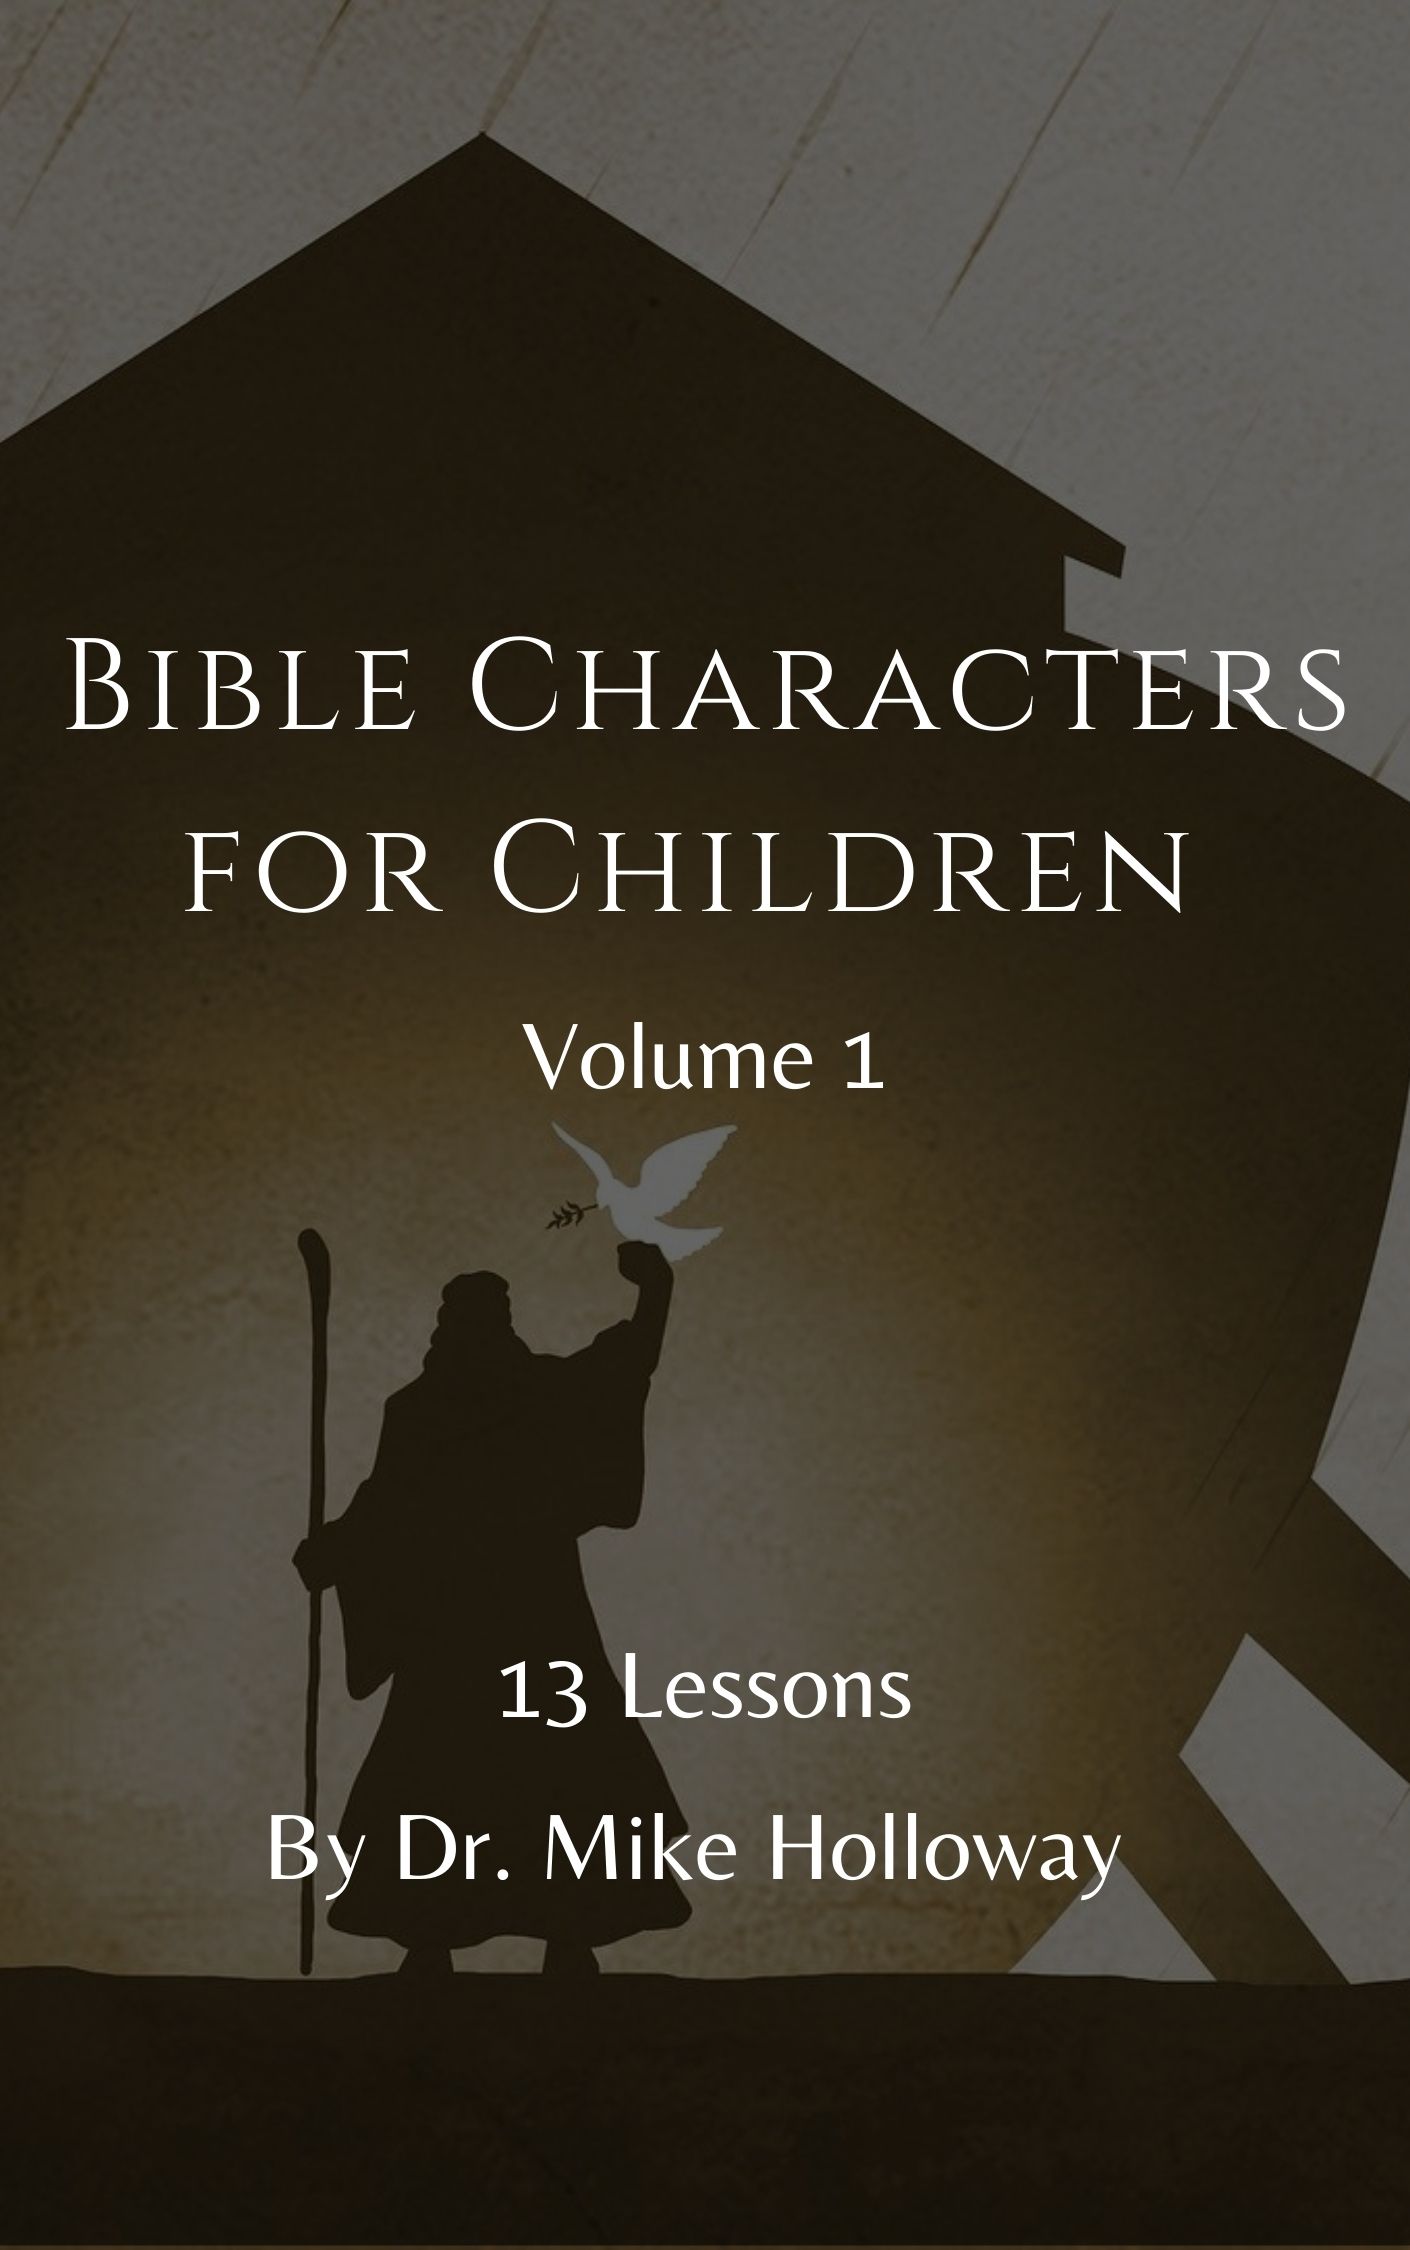 Bible Characters for Children – Volume 1